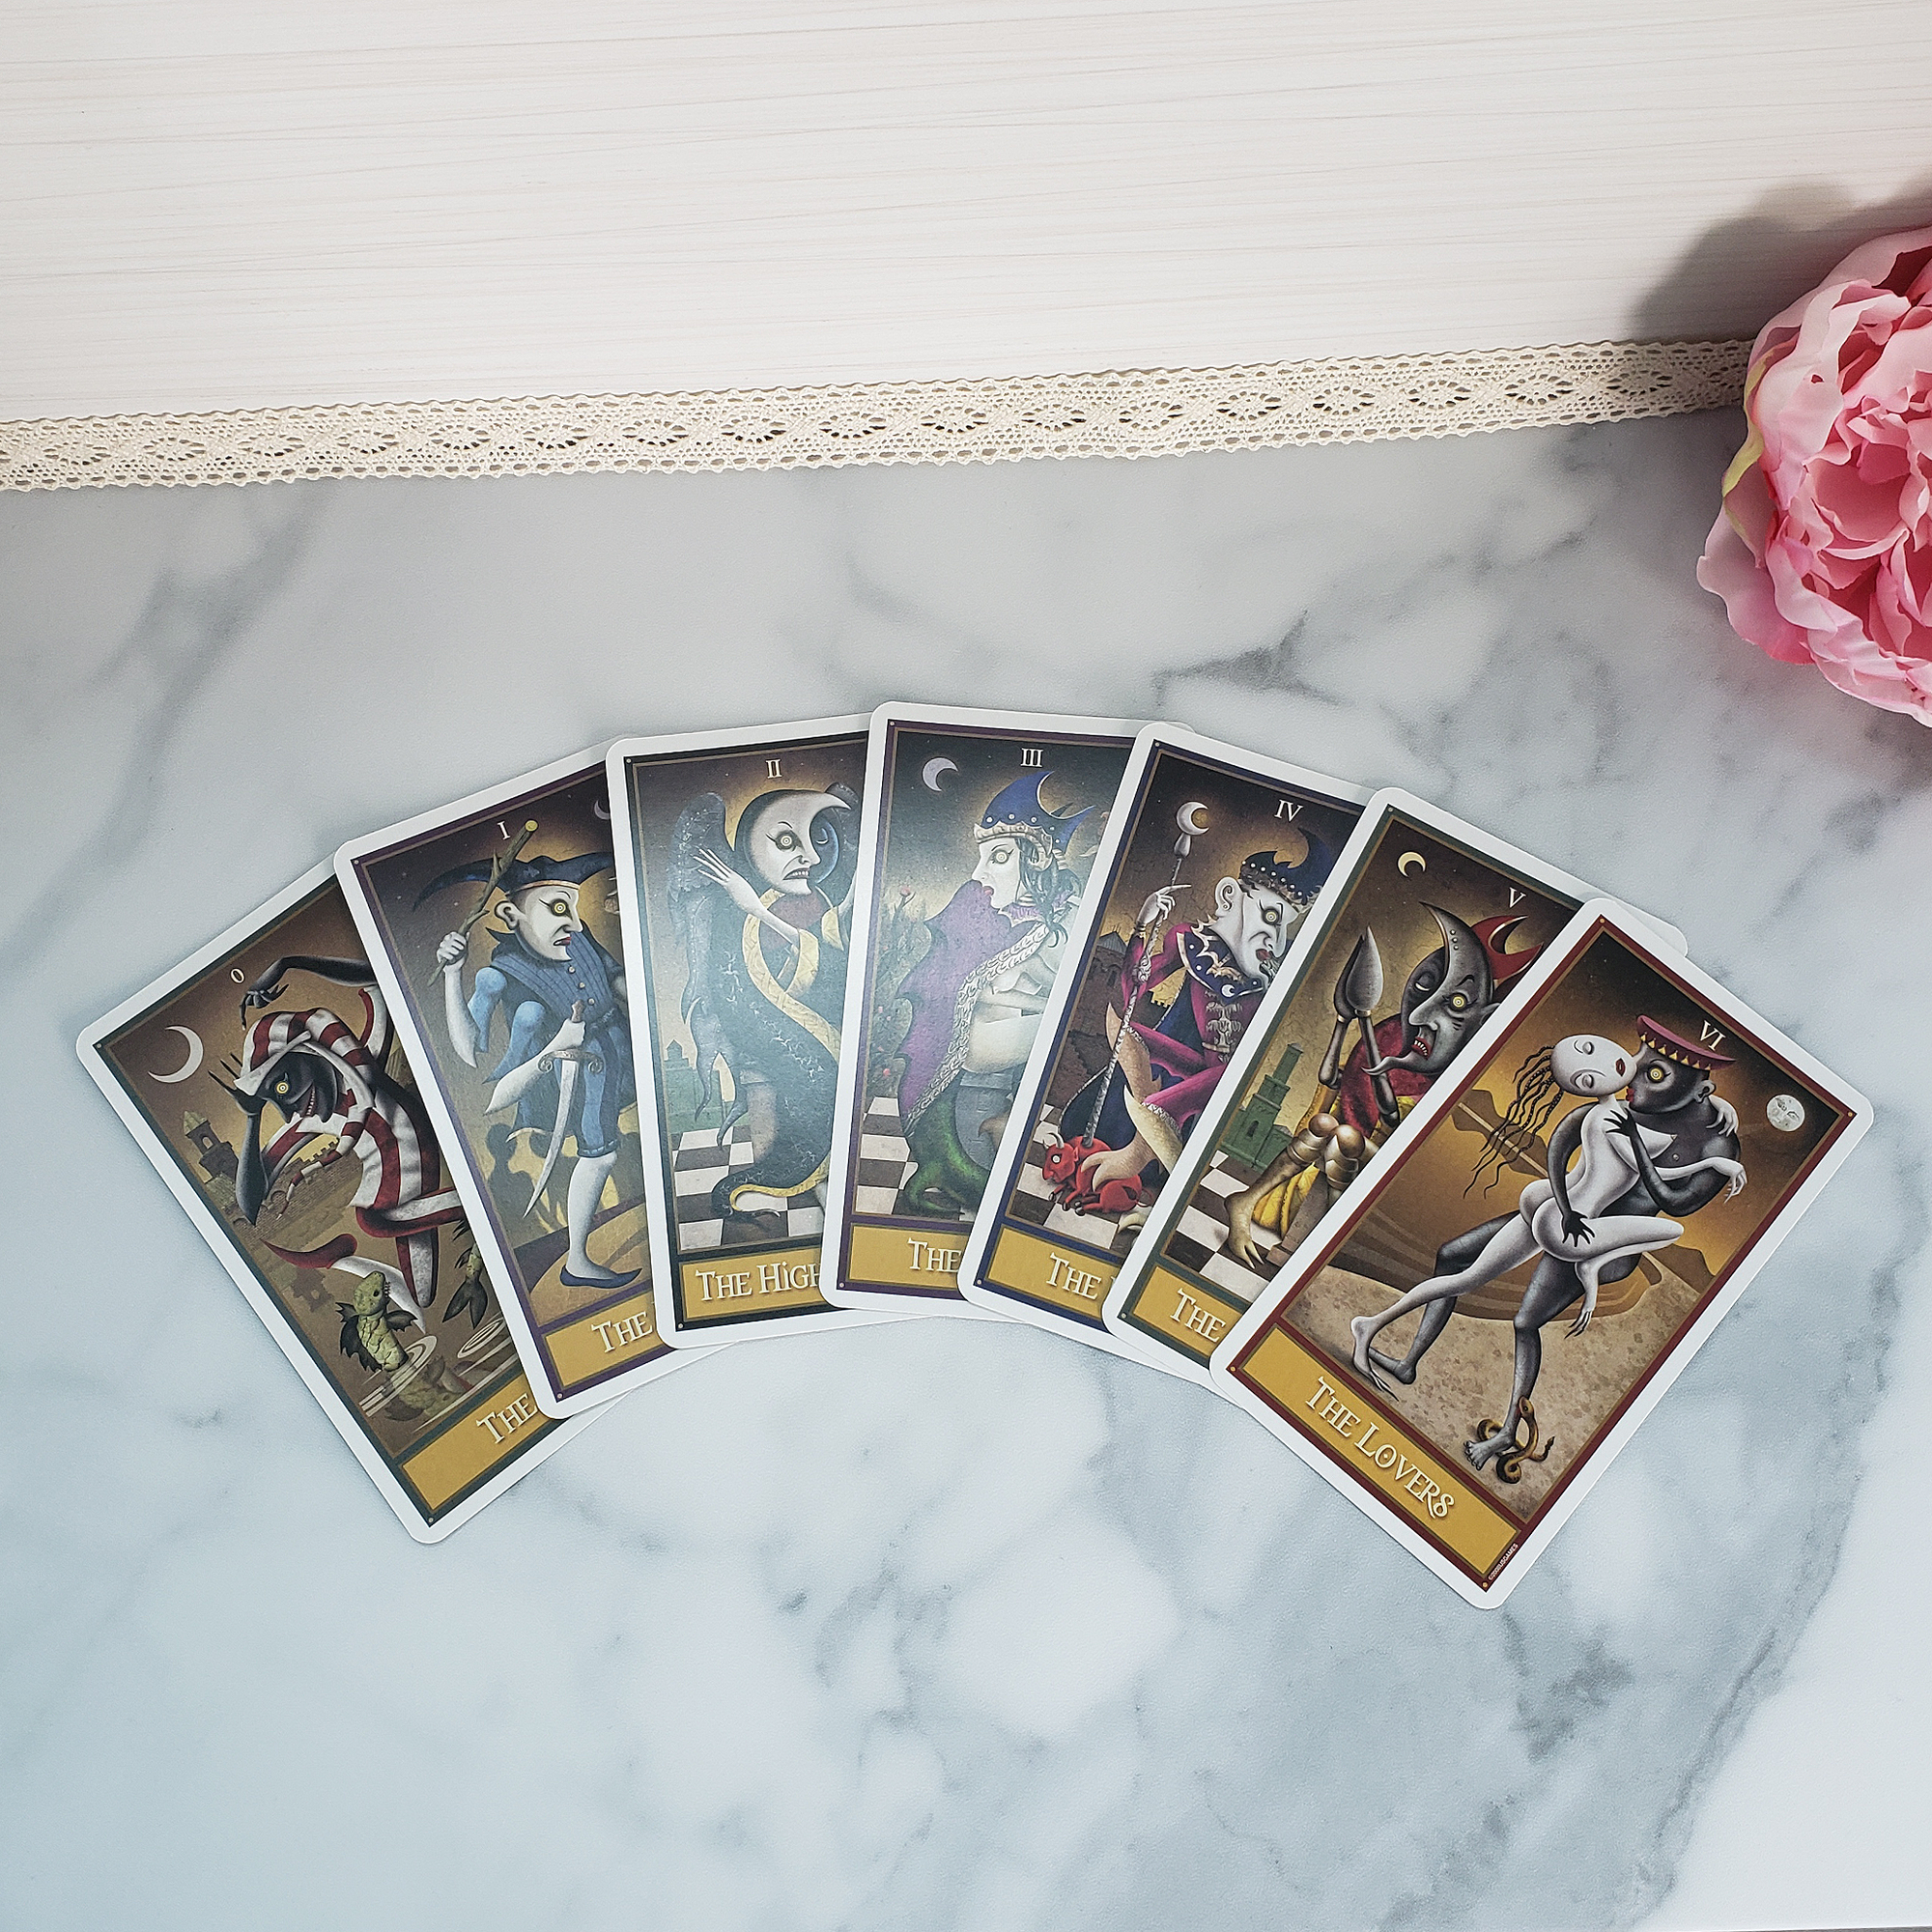 Deviant Moon Tarot Deck | Set of Tarot Cards | Divination Tool - Major Arcana from the Fool to the Lovers